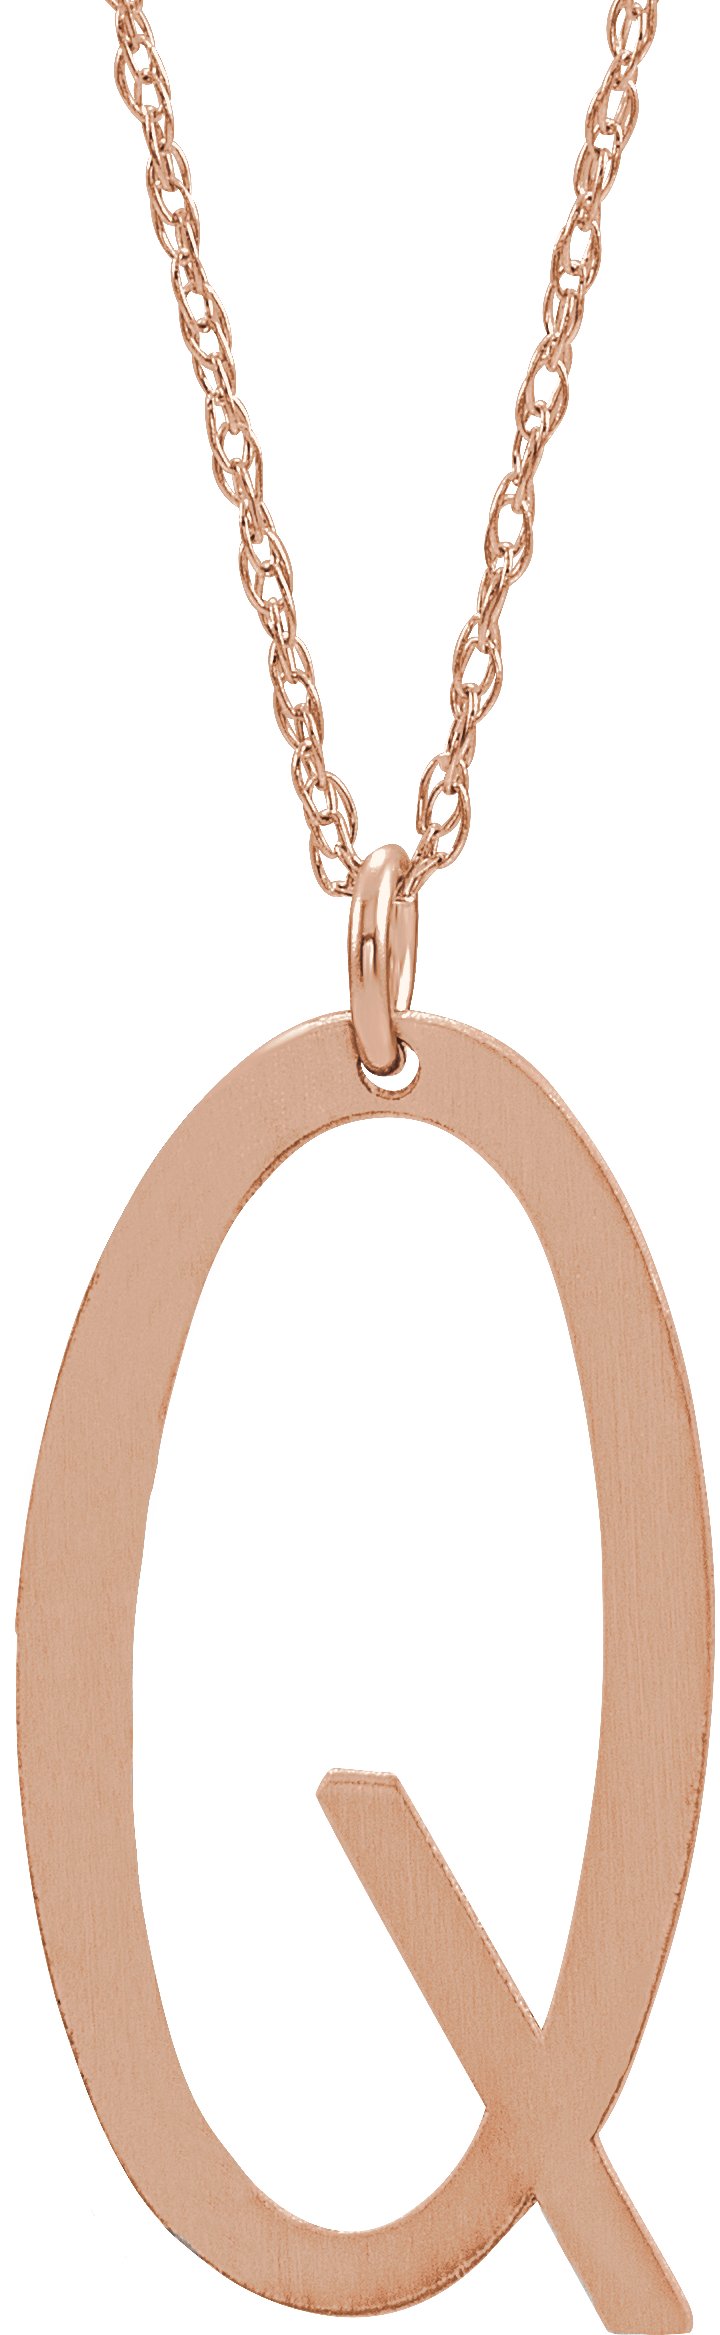 14K Rose Gold-Plated Sterling Silver Block Initial Q 16-18" Necklace with Brush Finish